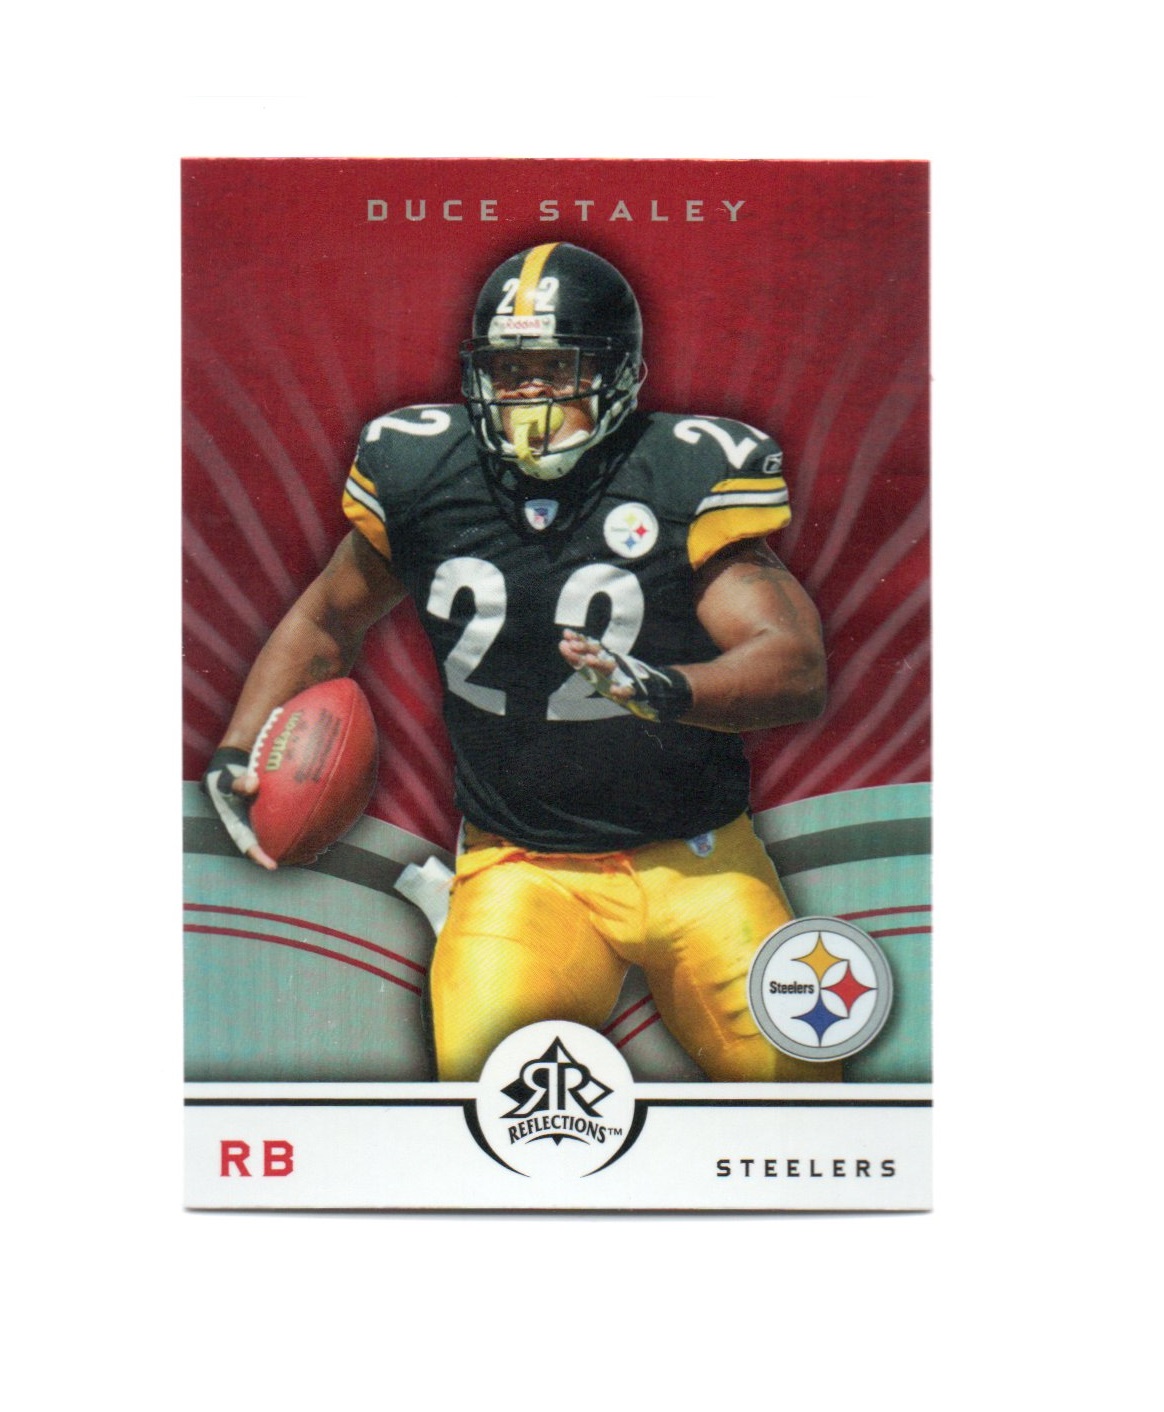 2005 Reflections #78 Duce Staley (10-X280-NFLSTEELERS)